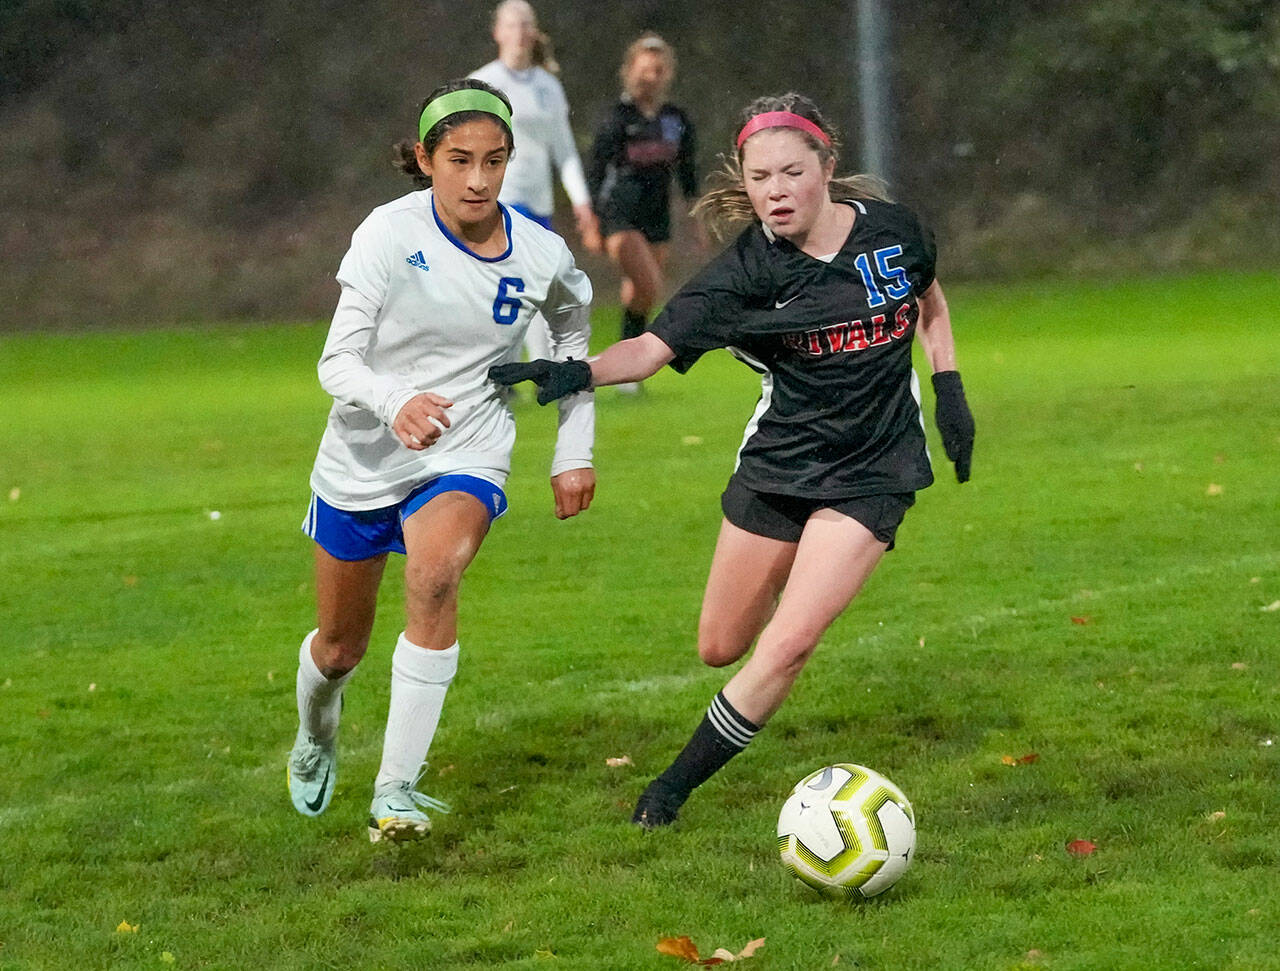 East Jefferson’s Ava Shiflett, right, beats out Bellevue Christian’s Lucy Carrel for control during a rain-soaked game on Tuesday at Memorial Field in Port Townsend. (Steve Mullensky/for Peninsula Daily News)